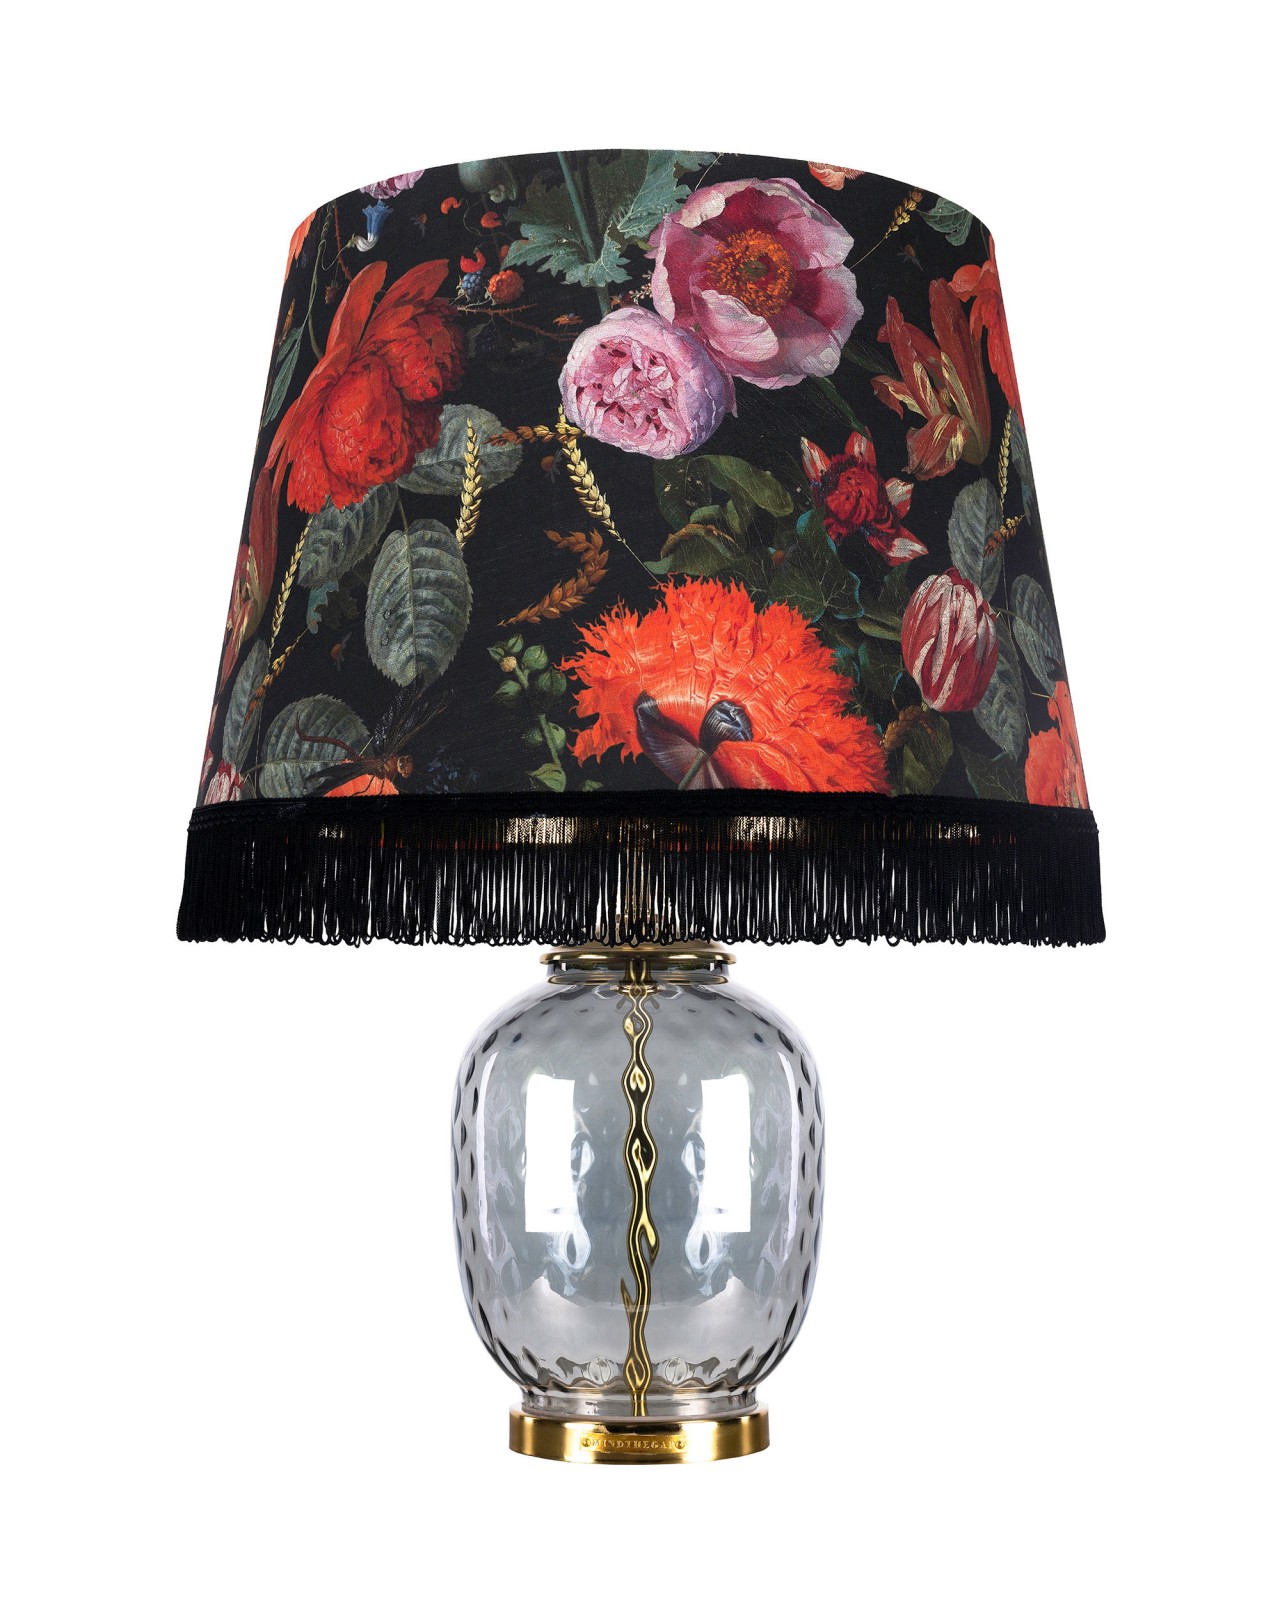 FLOWERS OF THE LADY CHELSEA Table Lamp